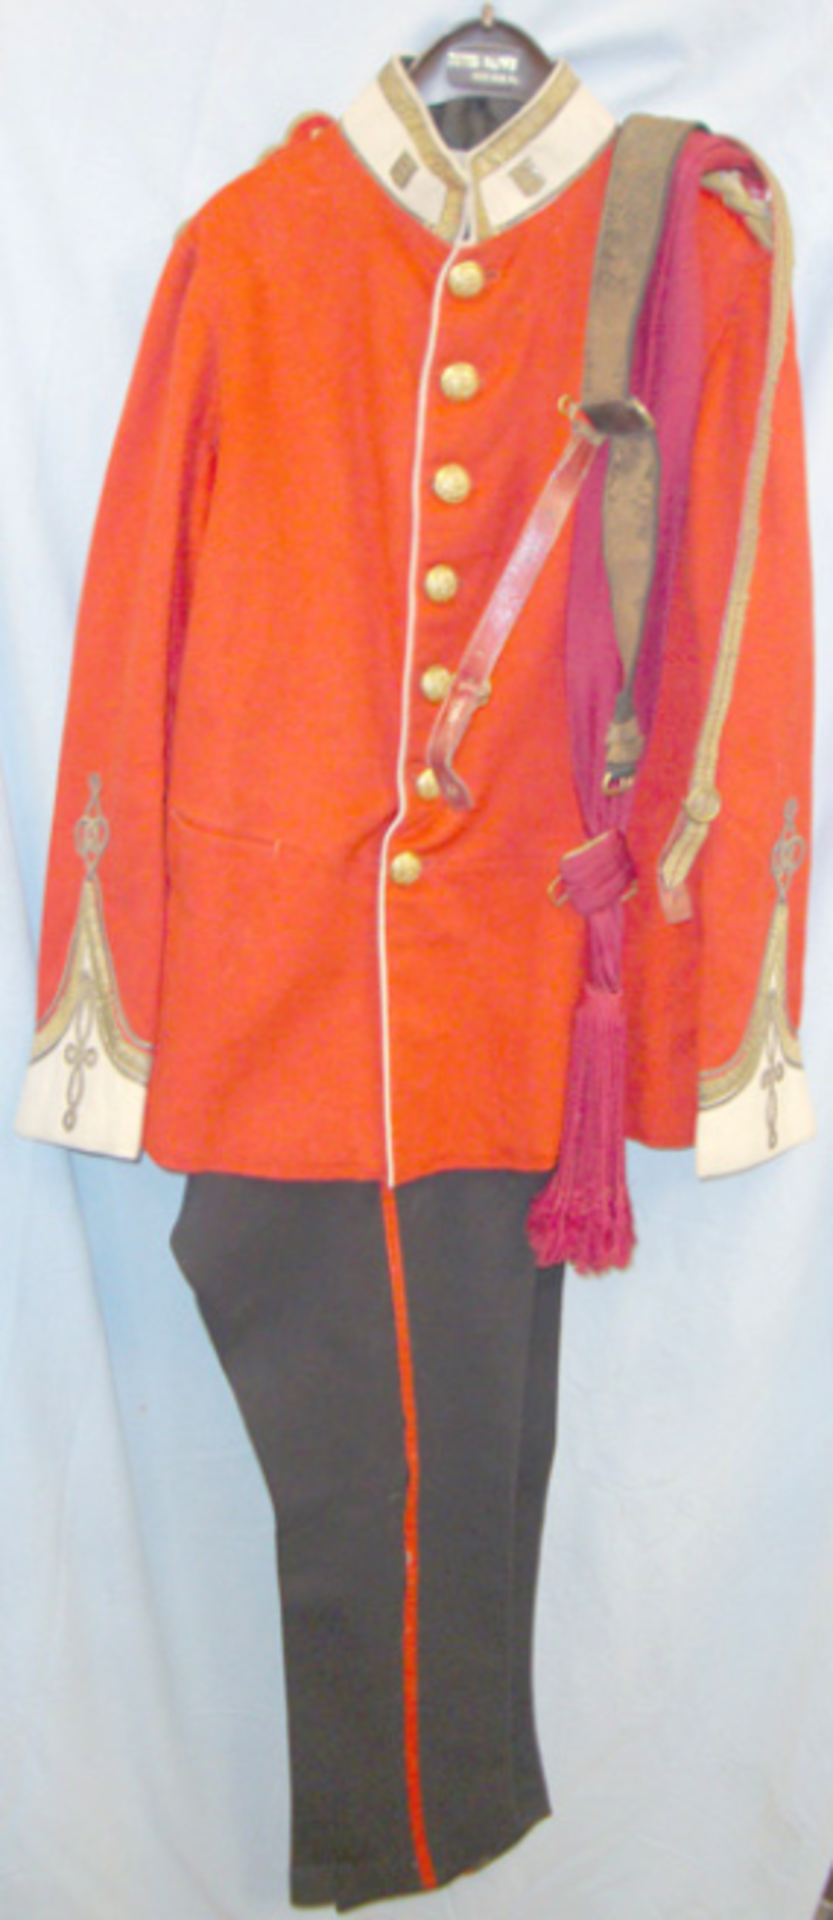 Captains Full Dress Uniform (Scarlet Tunic & Black Overall Trousers) Essex Regiment - Image 2 of 3